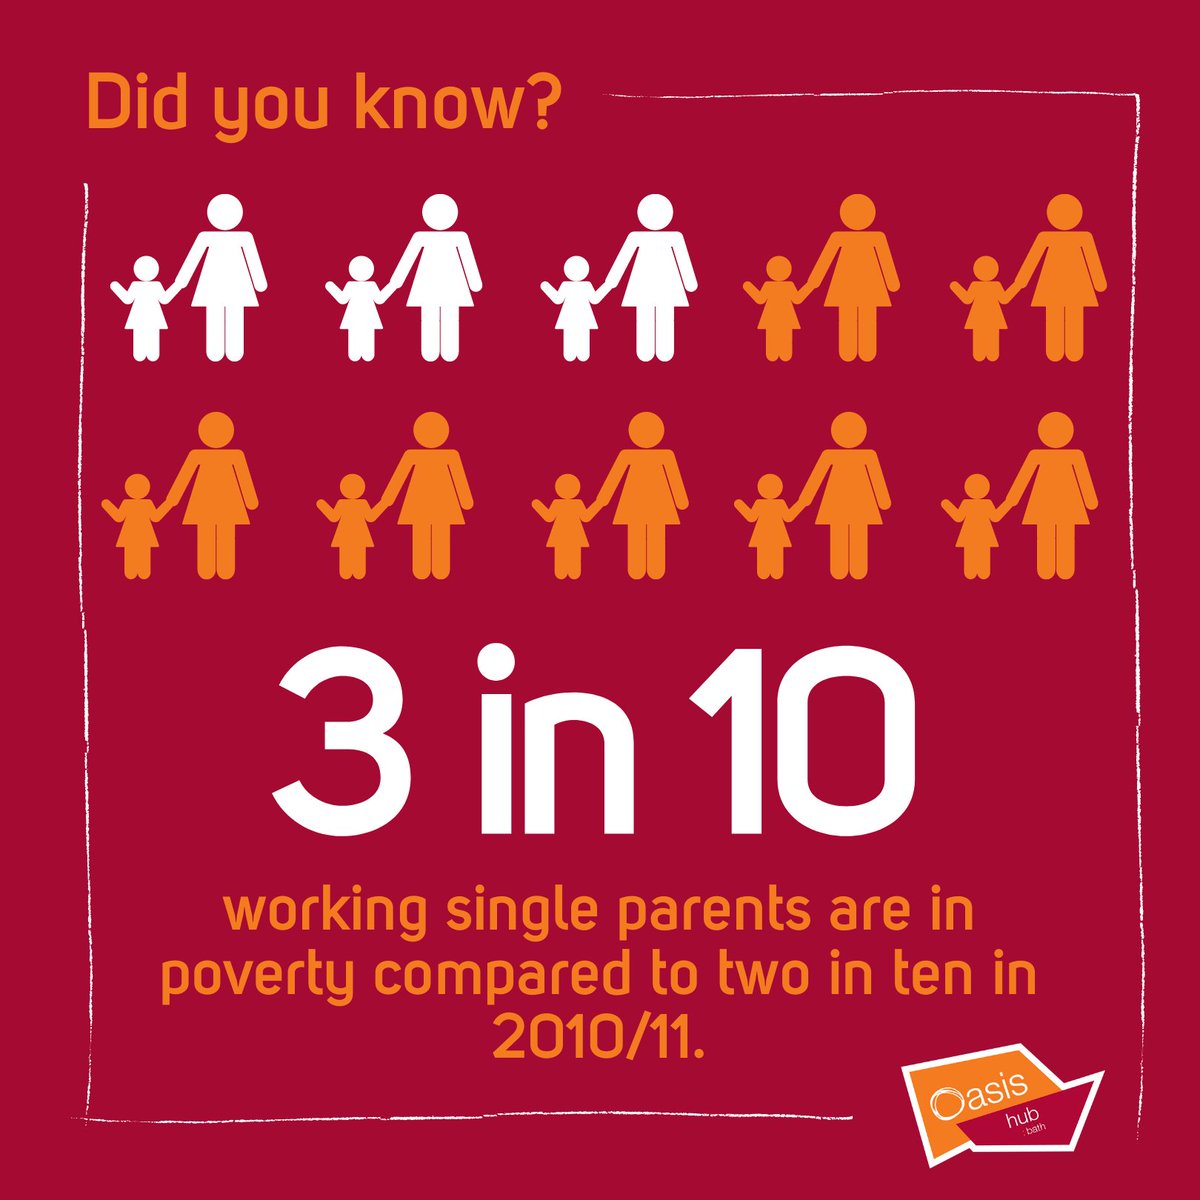 Did you know that three in ten working parents are in poverty compared to two in ten in 2010/2011?